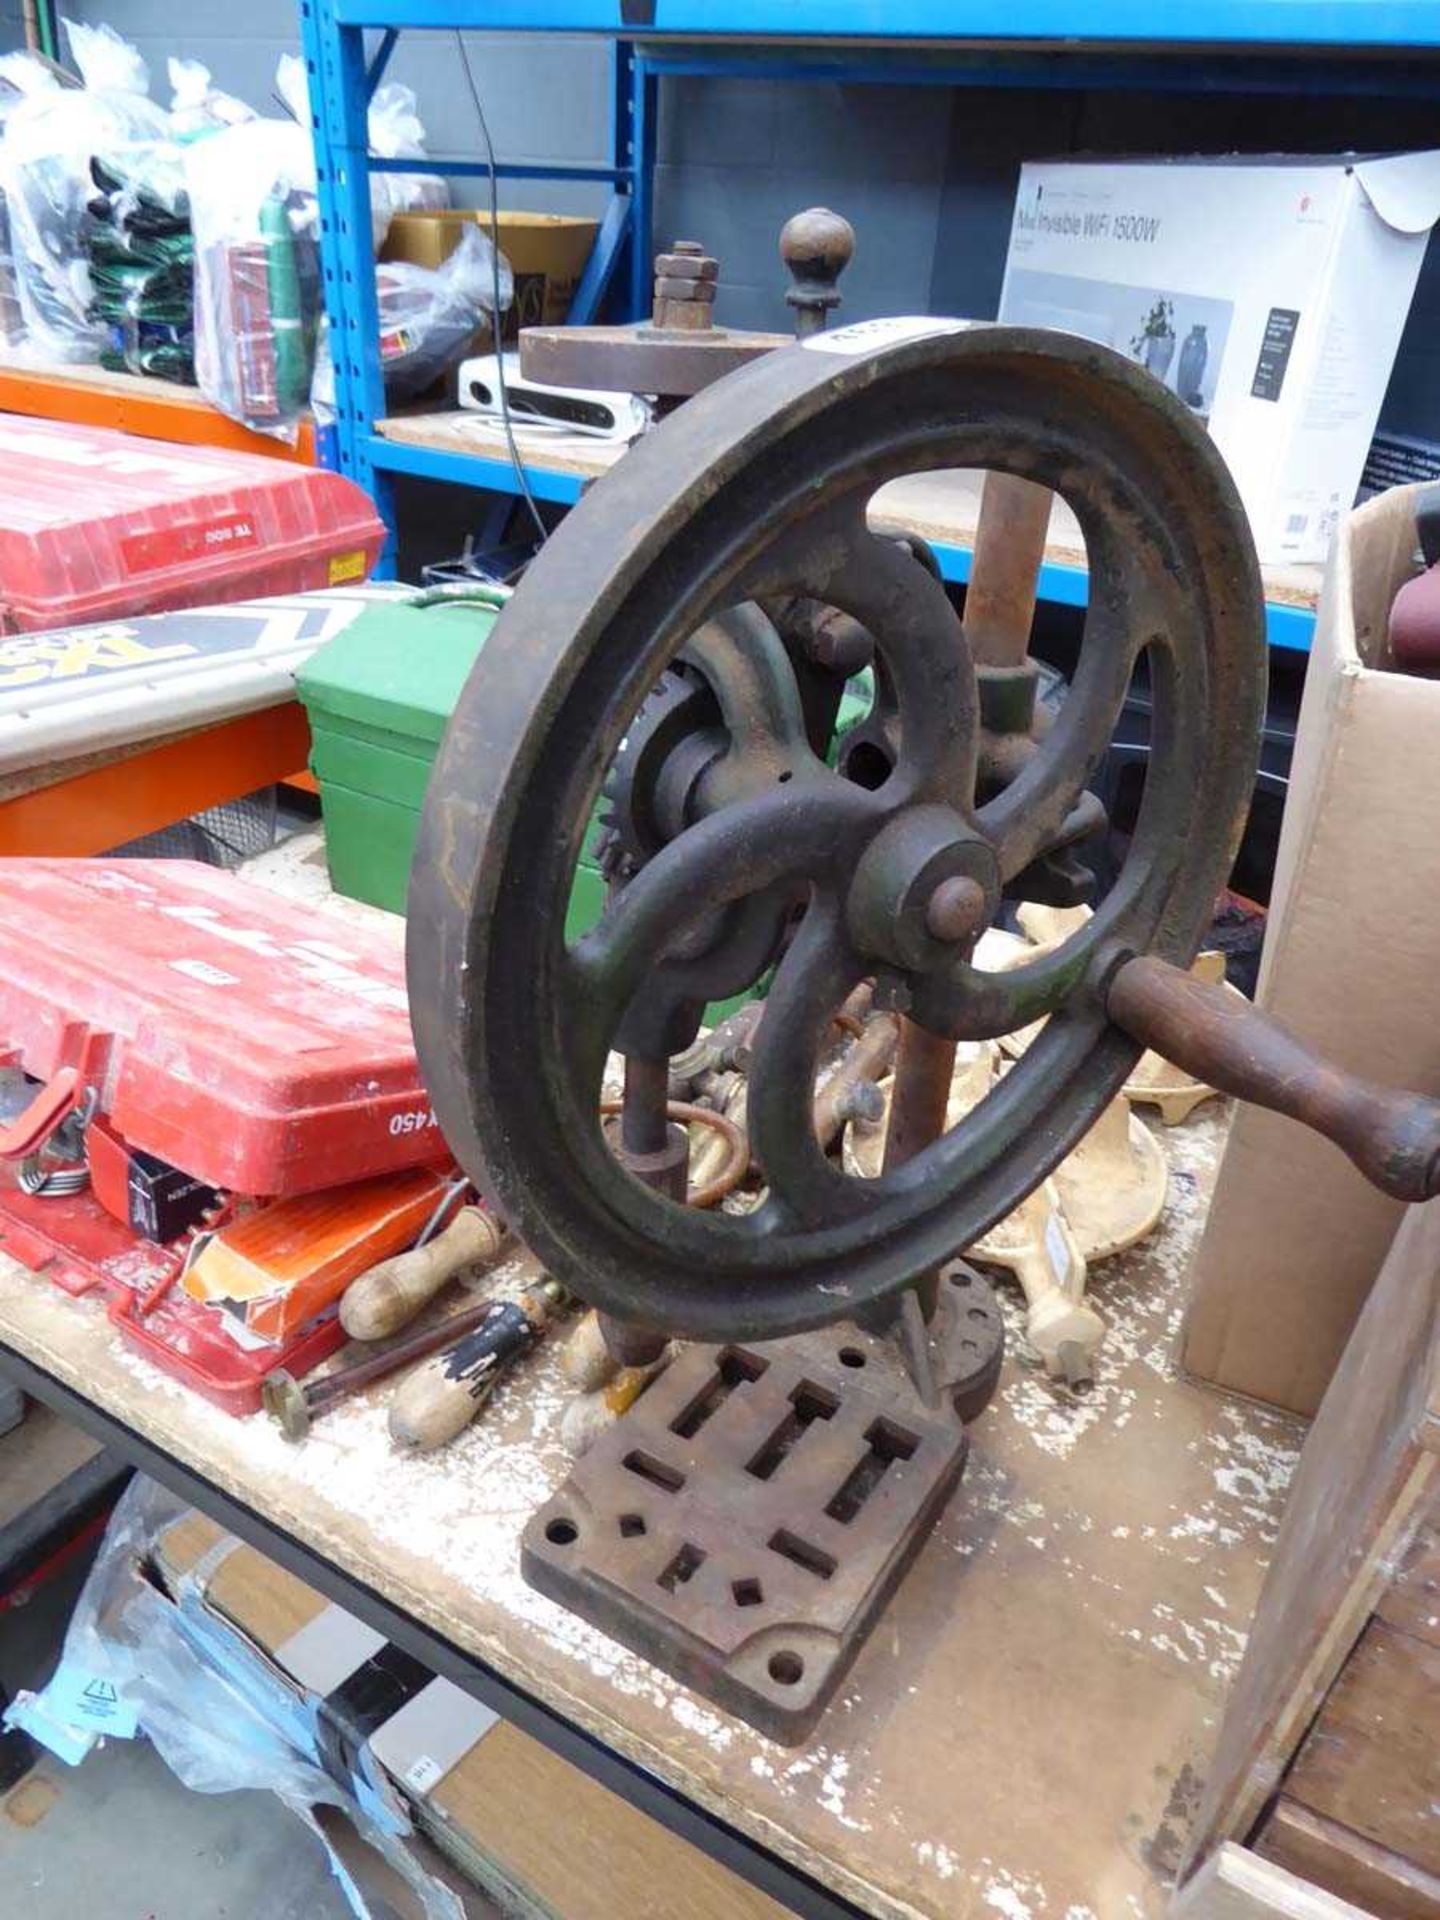 Vintage hand drill, pumps and boiling rings - Image 2 of 3